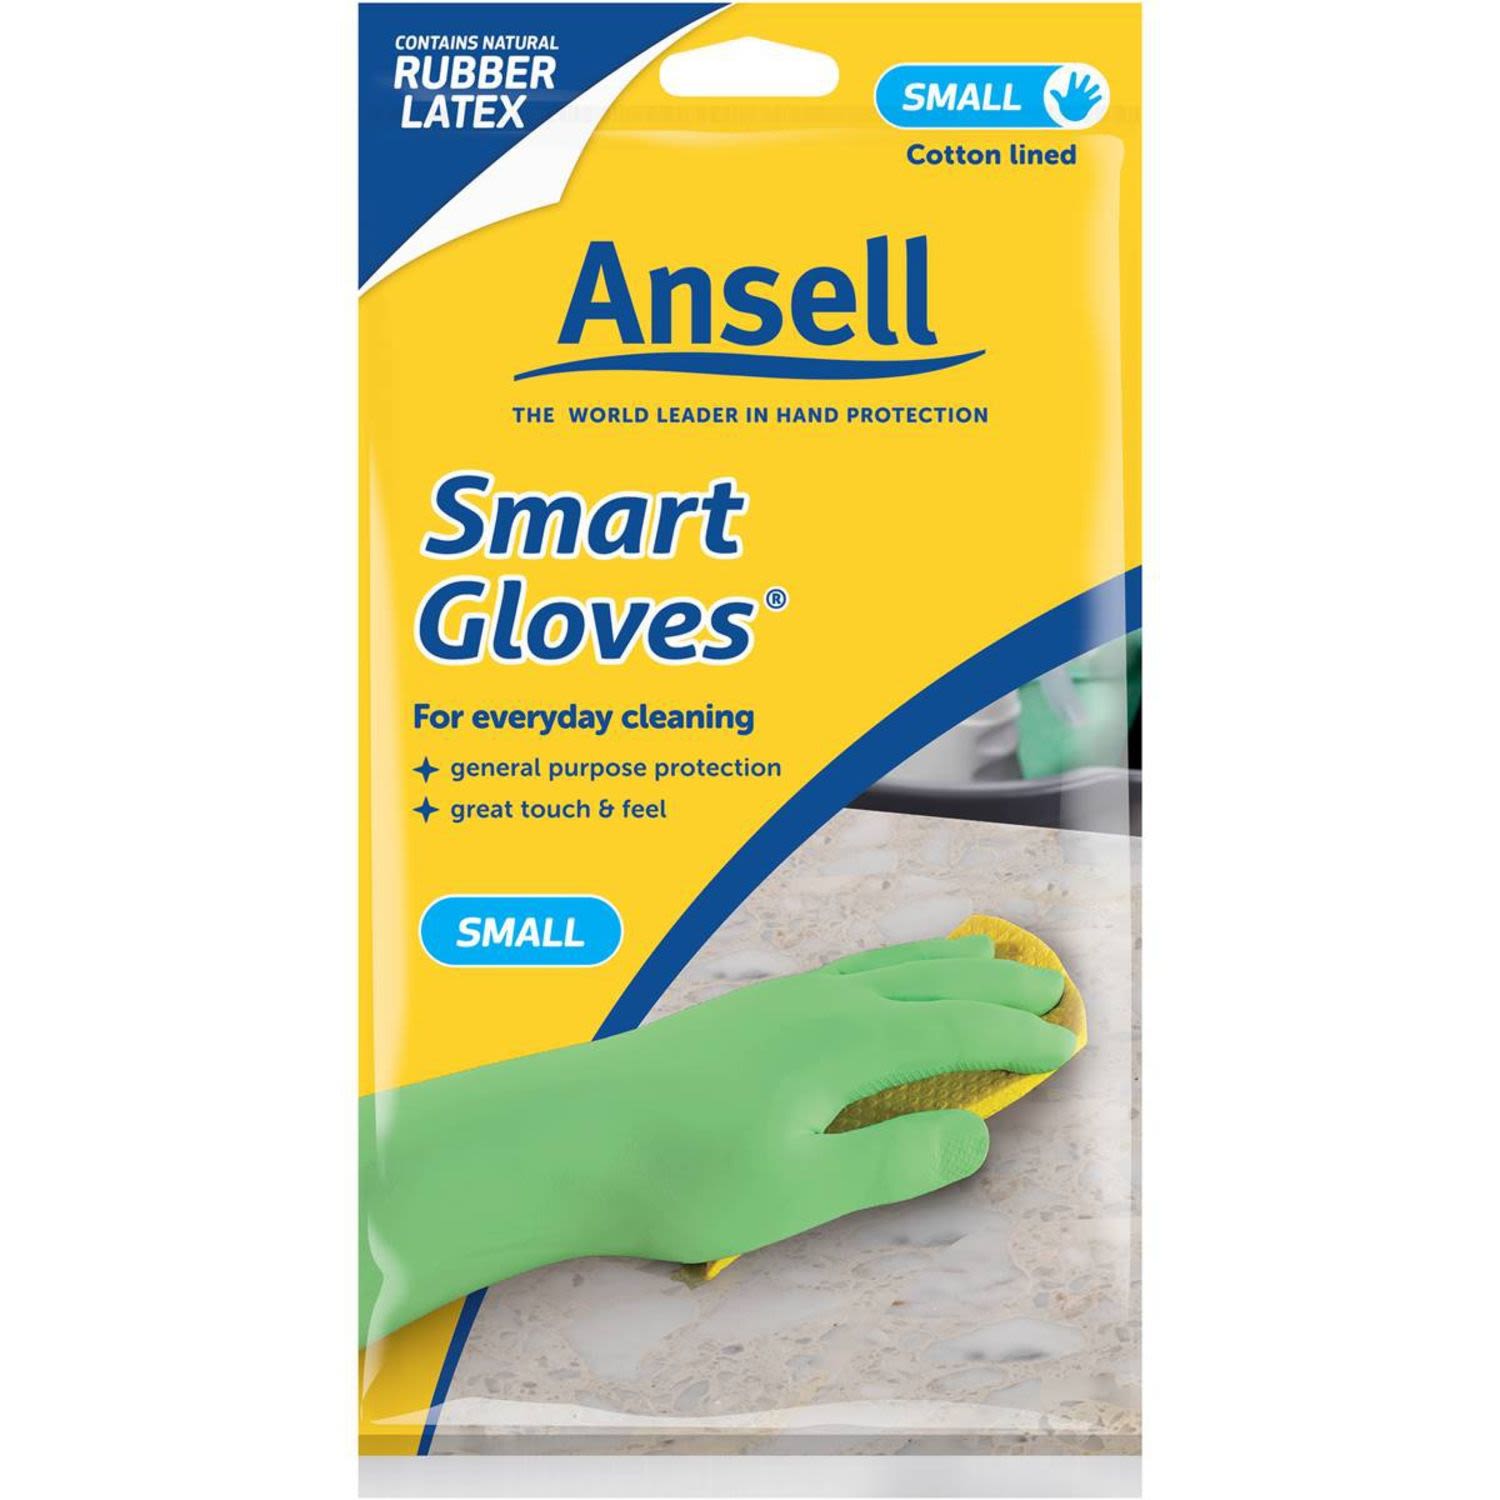 Ansell Gloves Smart Small, 1 Each